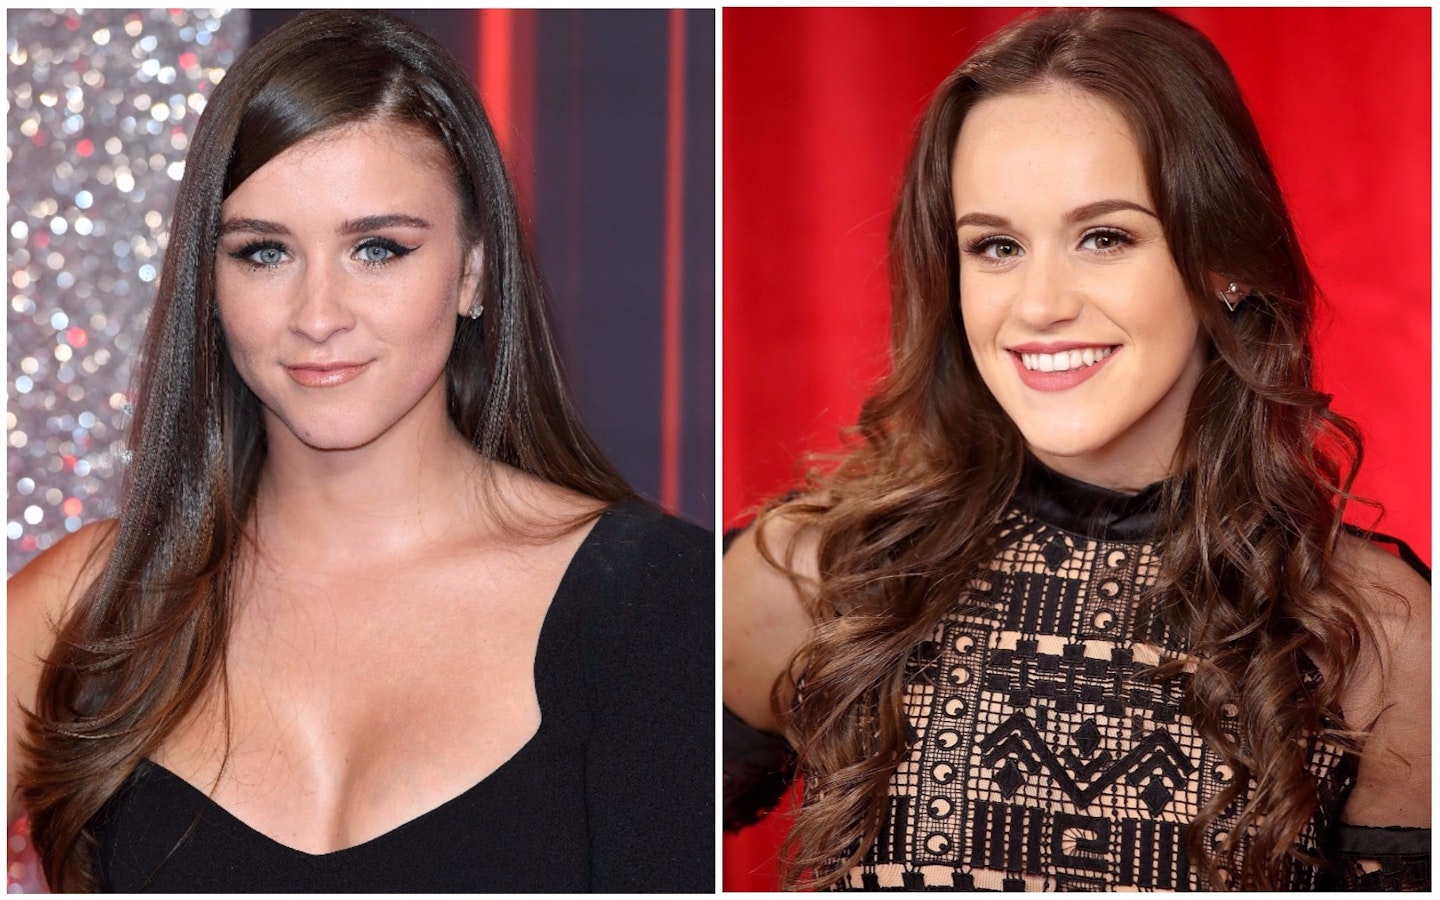 Brooke Vincent and Ellie Leach